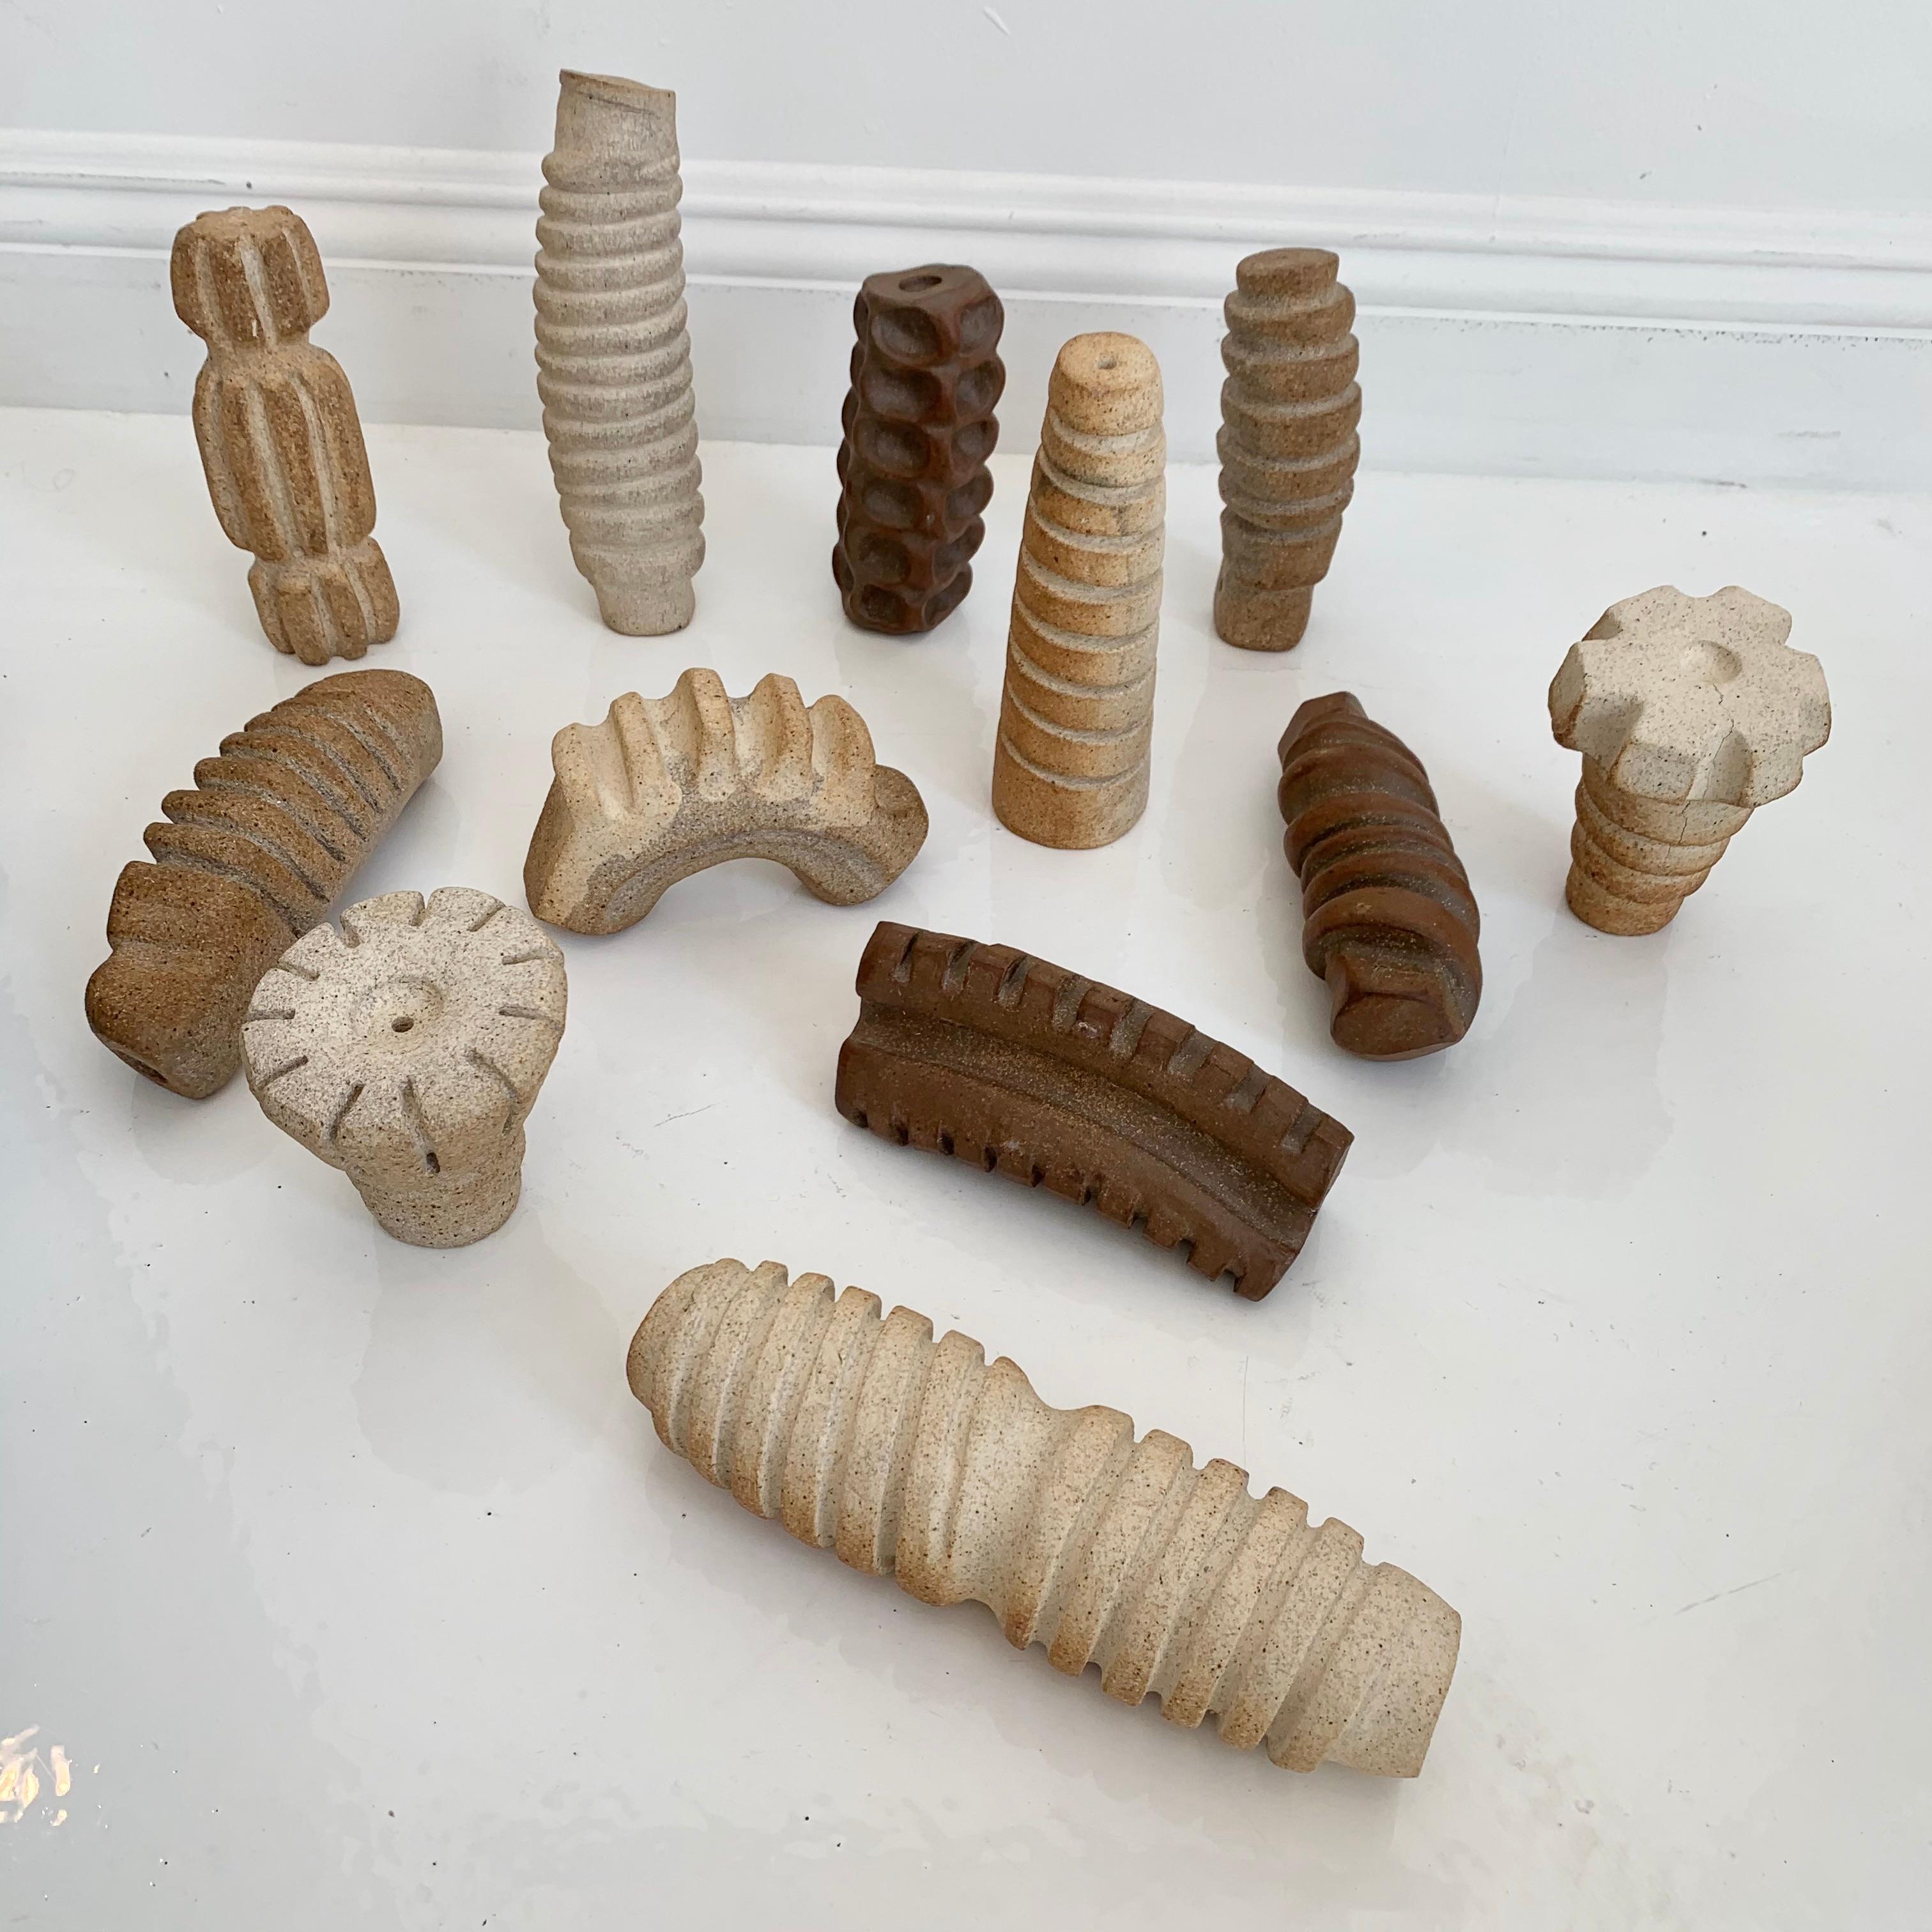 Gorgeous clay sculptures and pottery by Los Angeles artist, Polina Perl. This a series of fragments or fossils. All hand made, all one of a kind pieces. Different sizes, patinas, inconsistencies to each piece. 13 available. Priced individually.